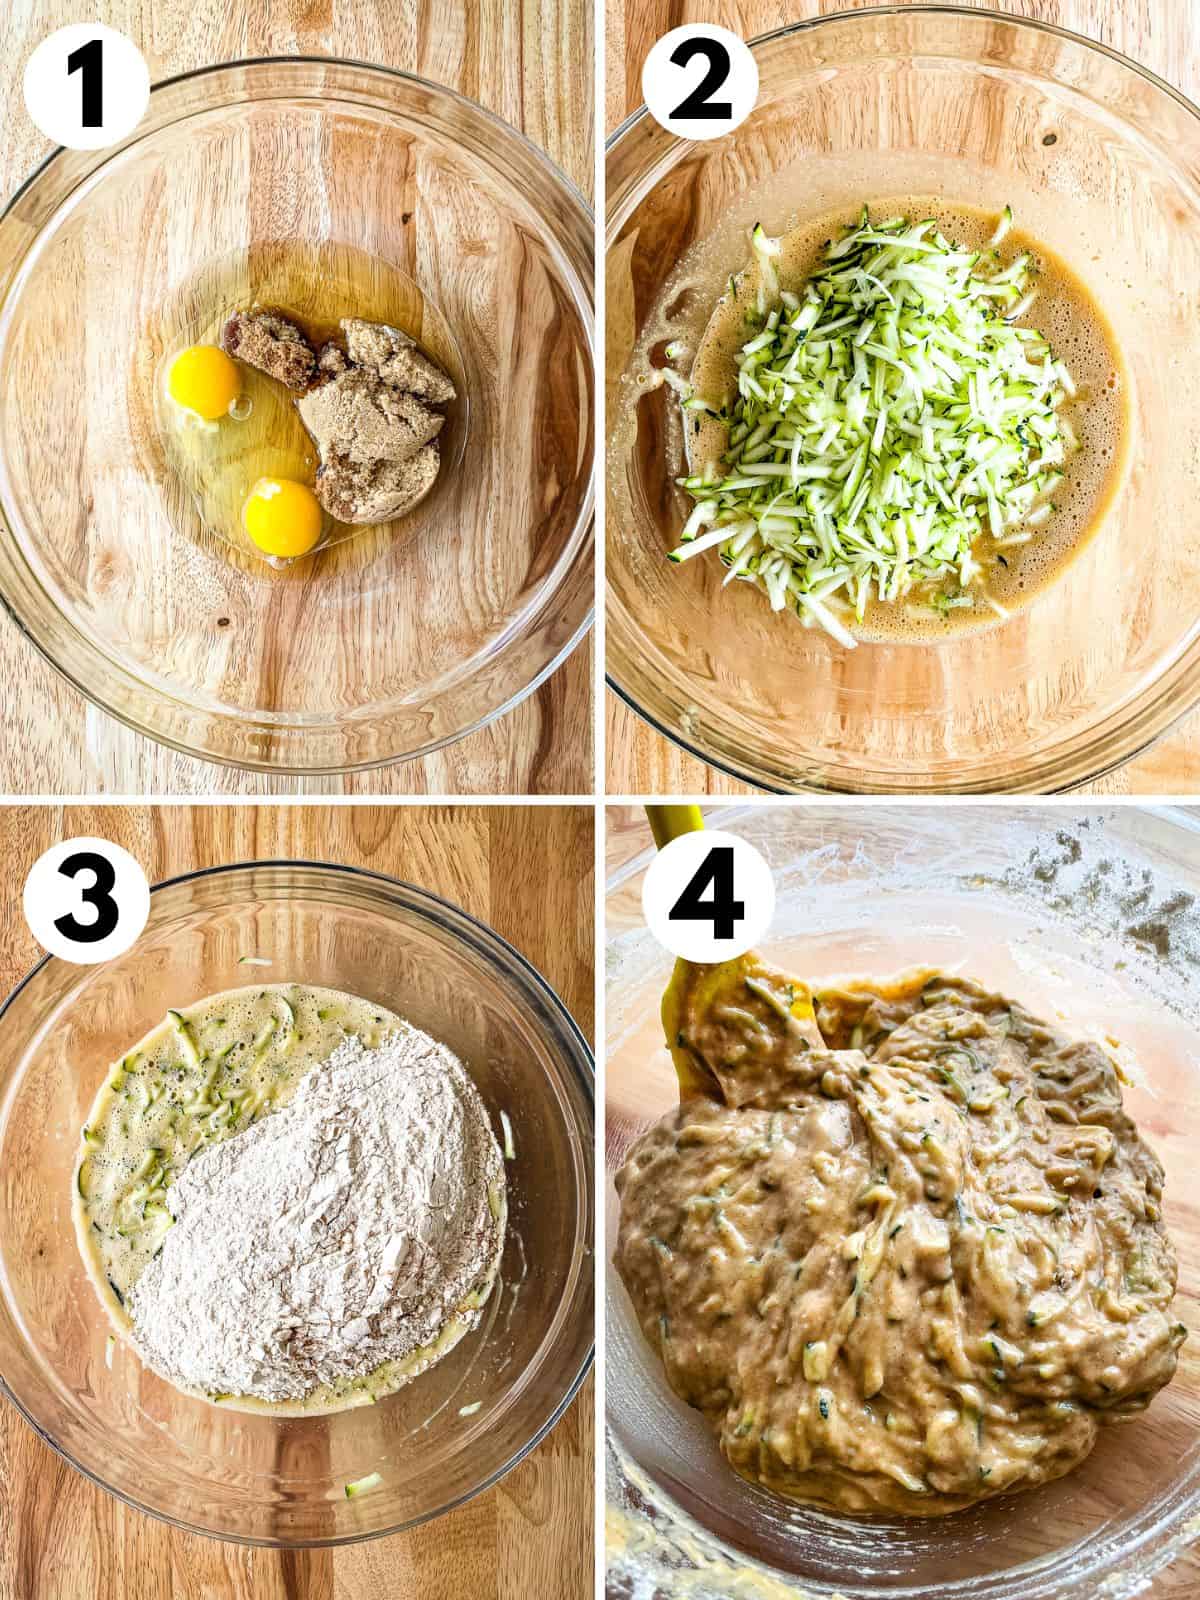 Steps one through four for making zucchini crumb muffins batter. 1. Mixing the eggs, oil, brown sugar, and vanilla extract. 2. Adding the shredded zucchini. 3. Stir in the dry ingredients. 4. The batter in the bowl.